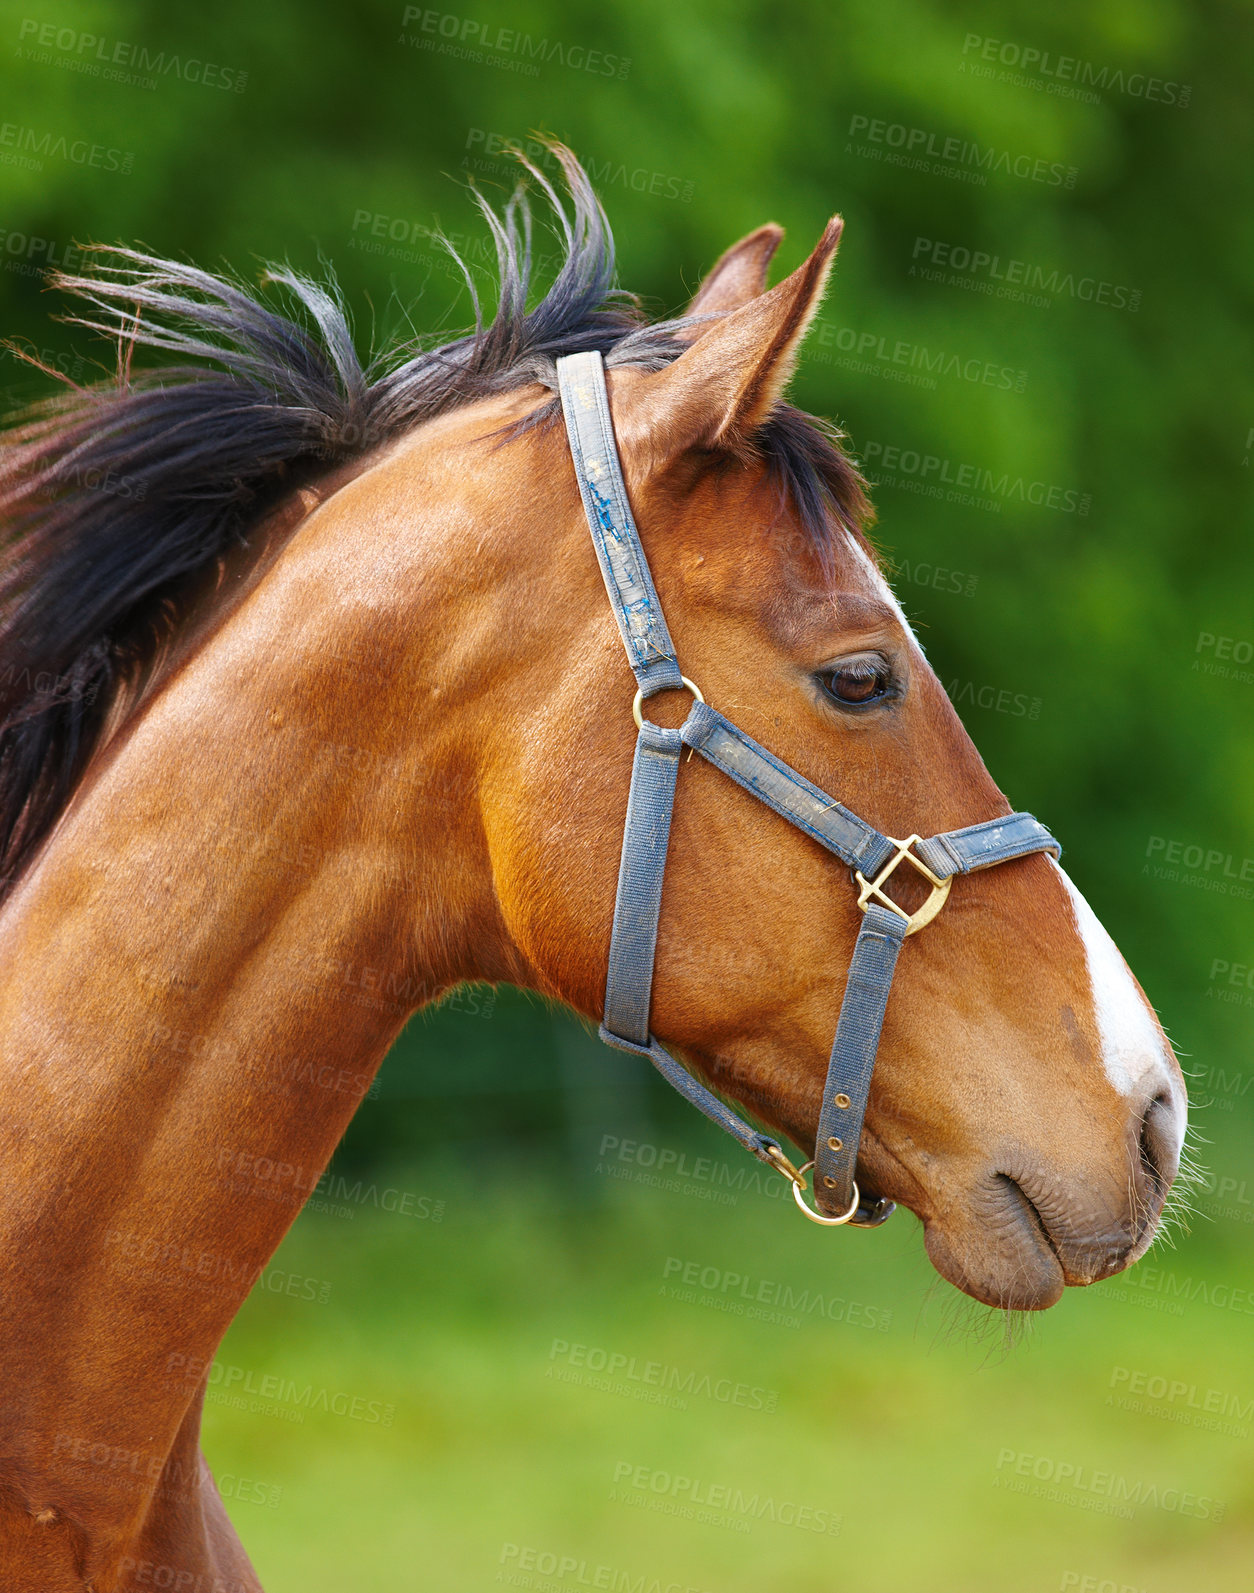 Buy stock photo A beautiful horse in the countryside